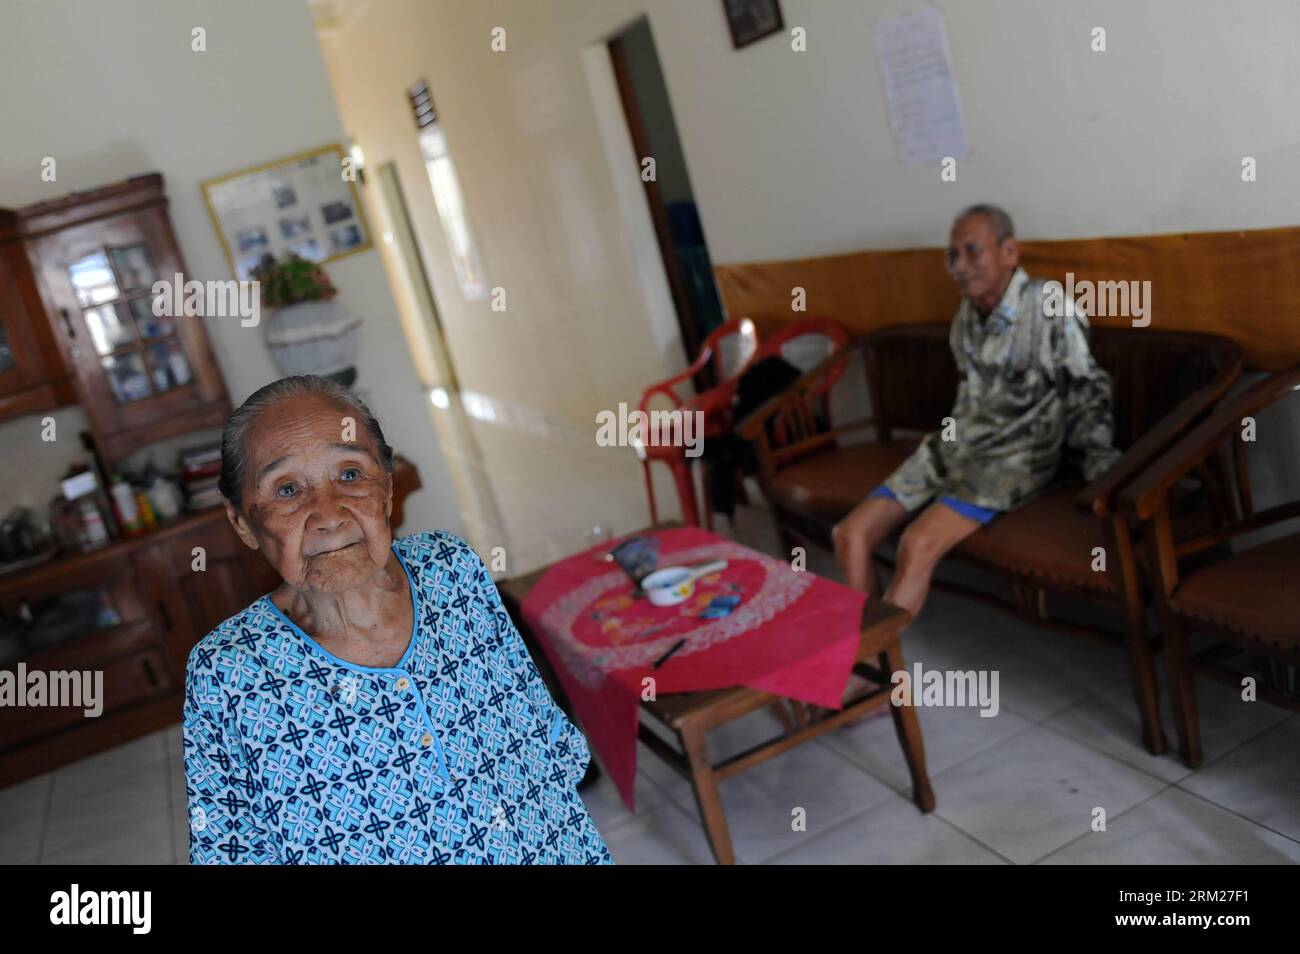 Bildnummer: 59726031  Datum: 29.05.2013  Copyright: imago/Xinhua (130529) -- JAKARTA, May 29, 2013 (Xinhua) -- Lestari (L), 82 years old, and Marzuki, 78 years old, are seen in their residence at a house for elderly in Jakarta, Indoensia, May 29, 2013. The number of elderly citizens in Indonesia has reached 11 percent of the total population of 240 million in 2012. (Xinhua/Veri Sanovri) INDONESIA-JAKARTA-ELDERLY PUBLICATIONxNOTxINxCHN xcb x0x 2013 quer      59726031 Date 29 05 2013 Copyright Imago XINHUA  Jakarta May 29 2013 XINHUA Lestari l 82 Years Old and Marzuki 78 Years Old are Lakes in t Stock Photo